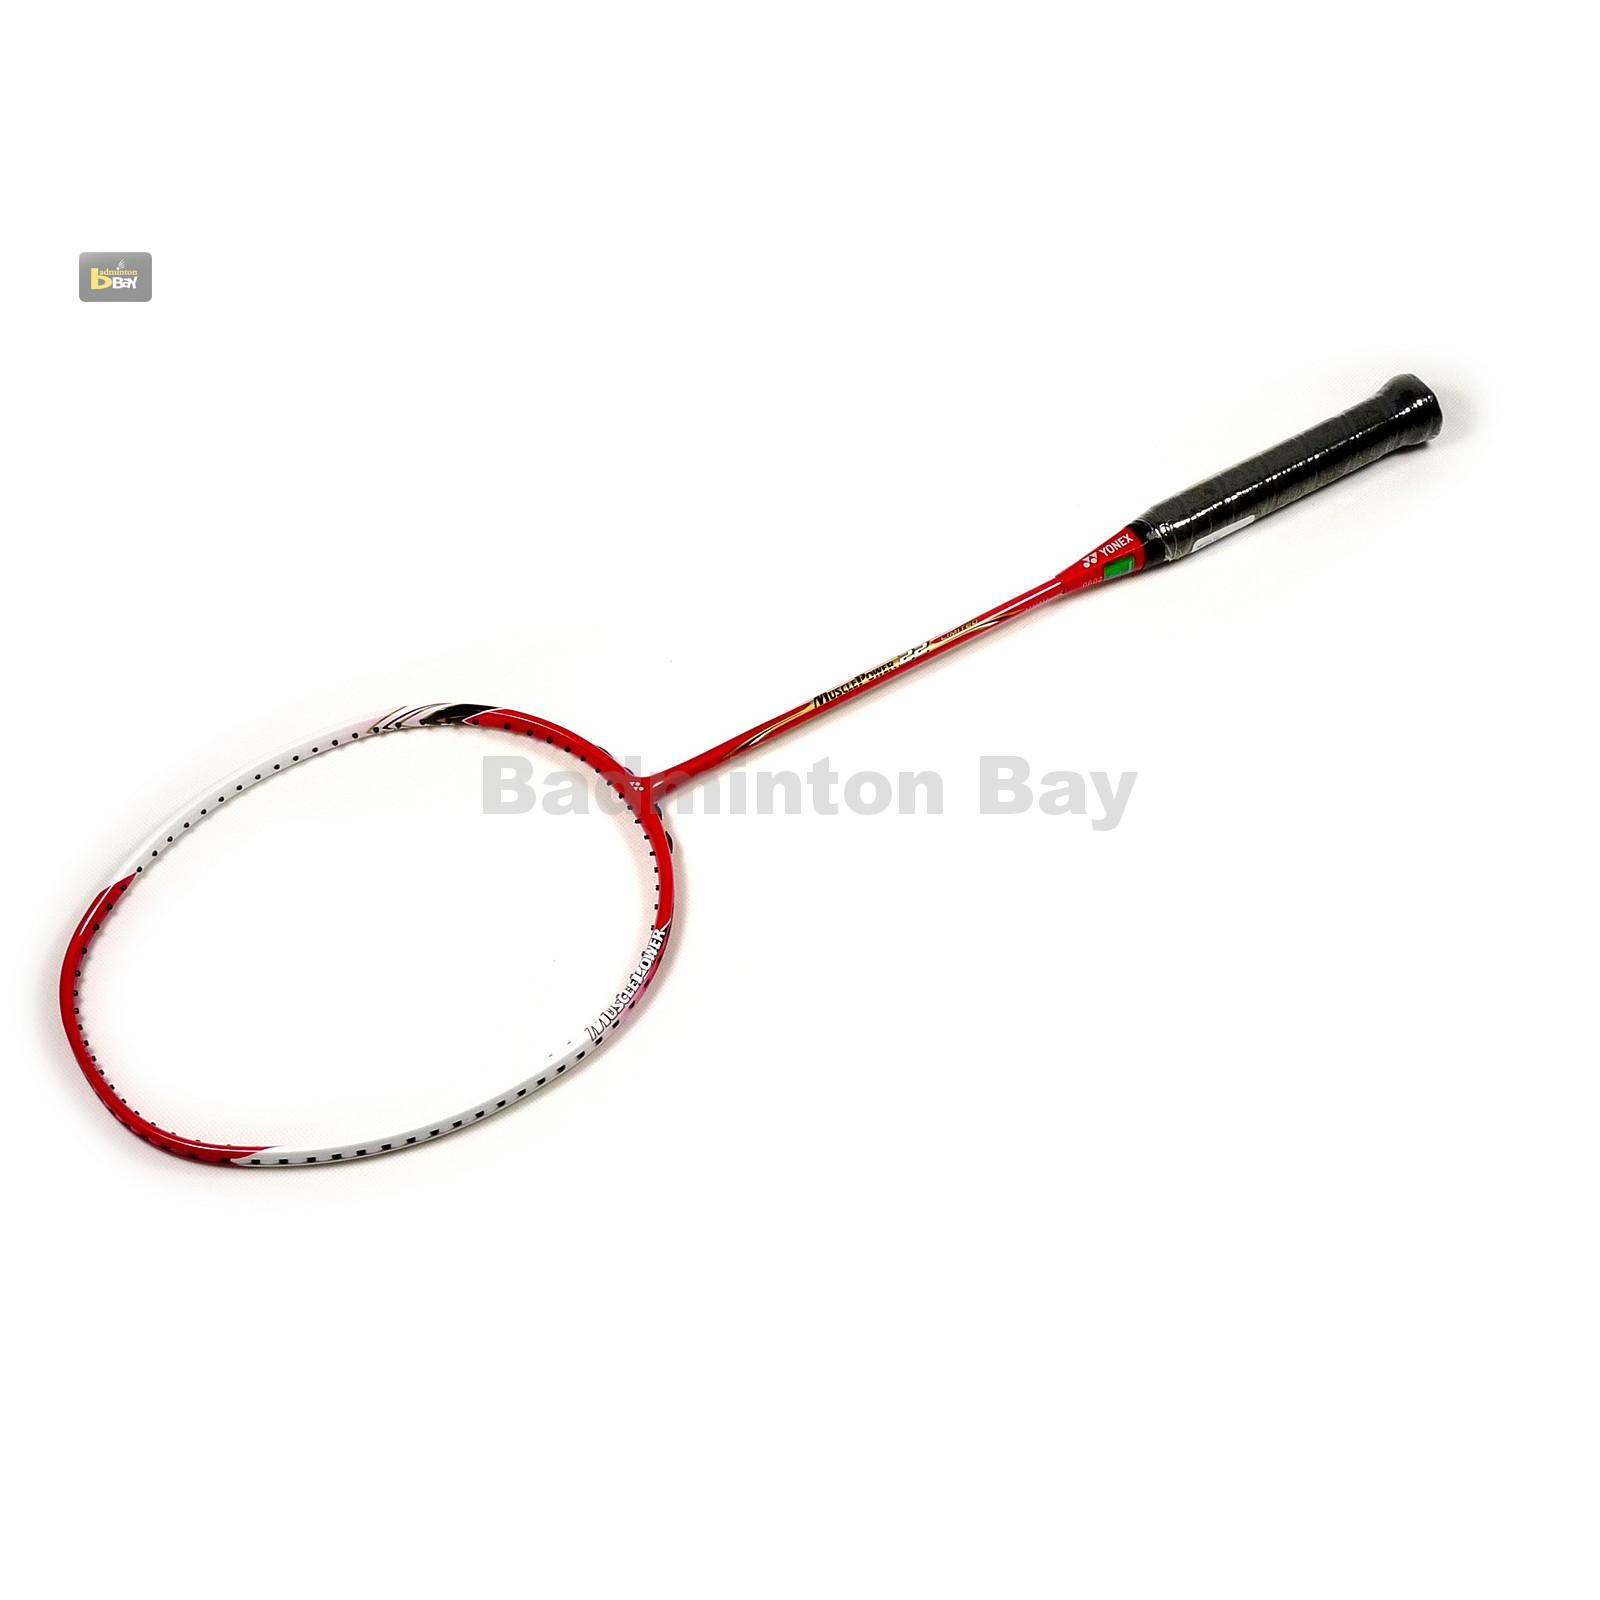 Out of Stock Yonex Muscle Power 22 Limited Edition MP22LTD Badminton Racket (3U)